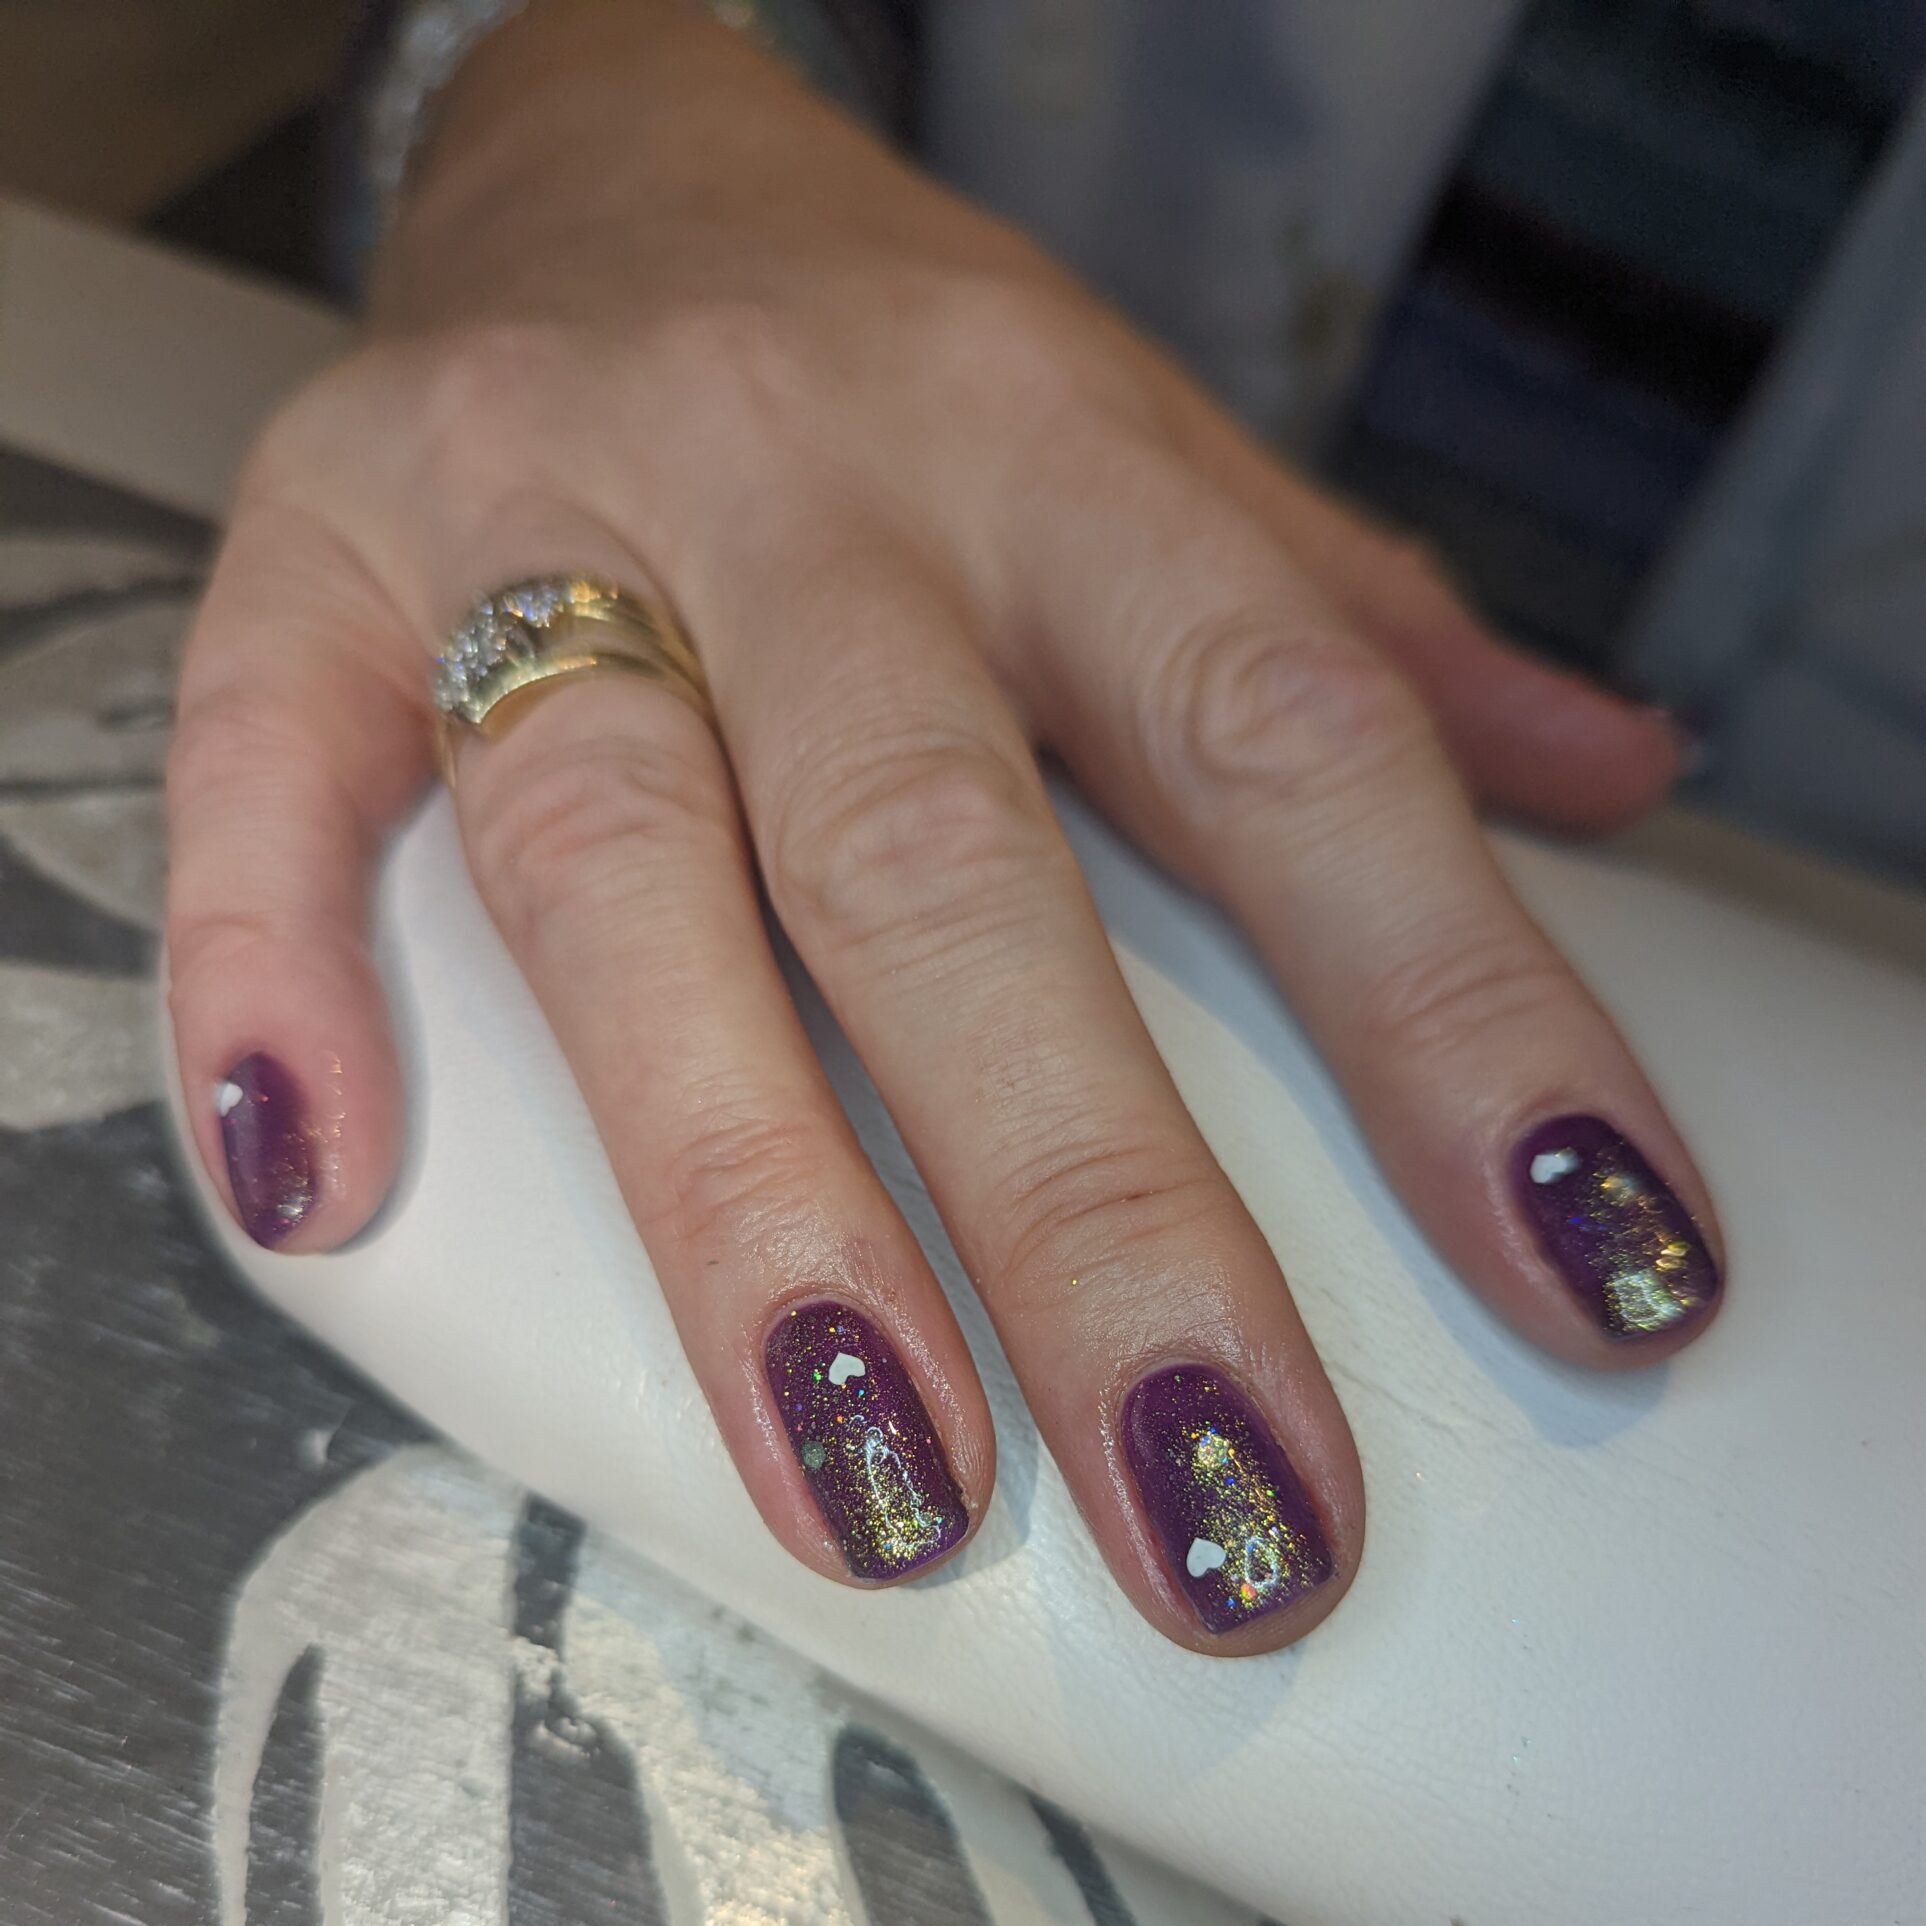 Bio Sculpture Amethyst nails with sparkles and tiny heart detail